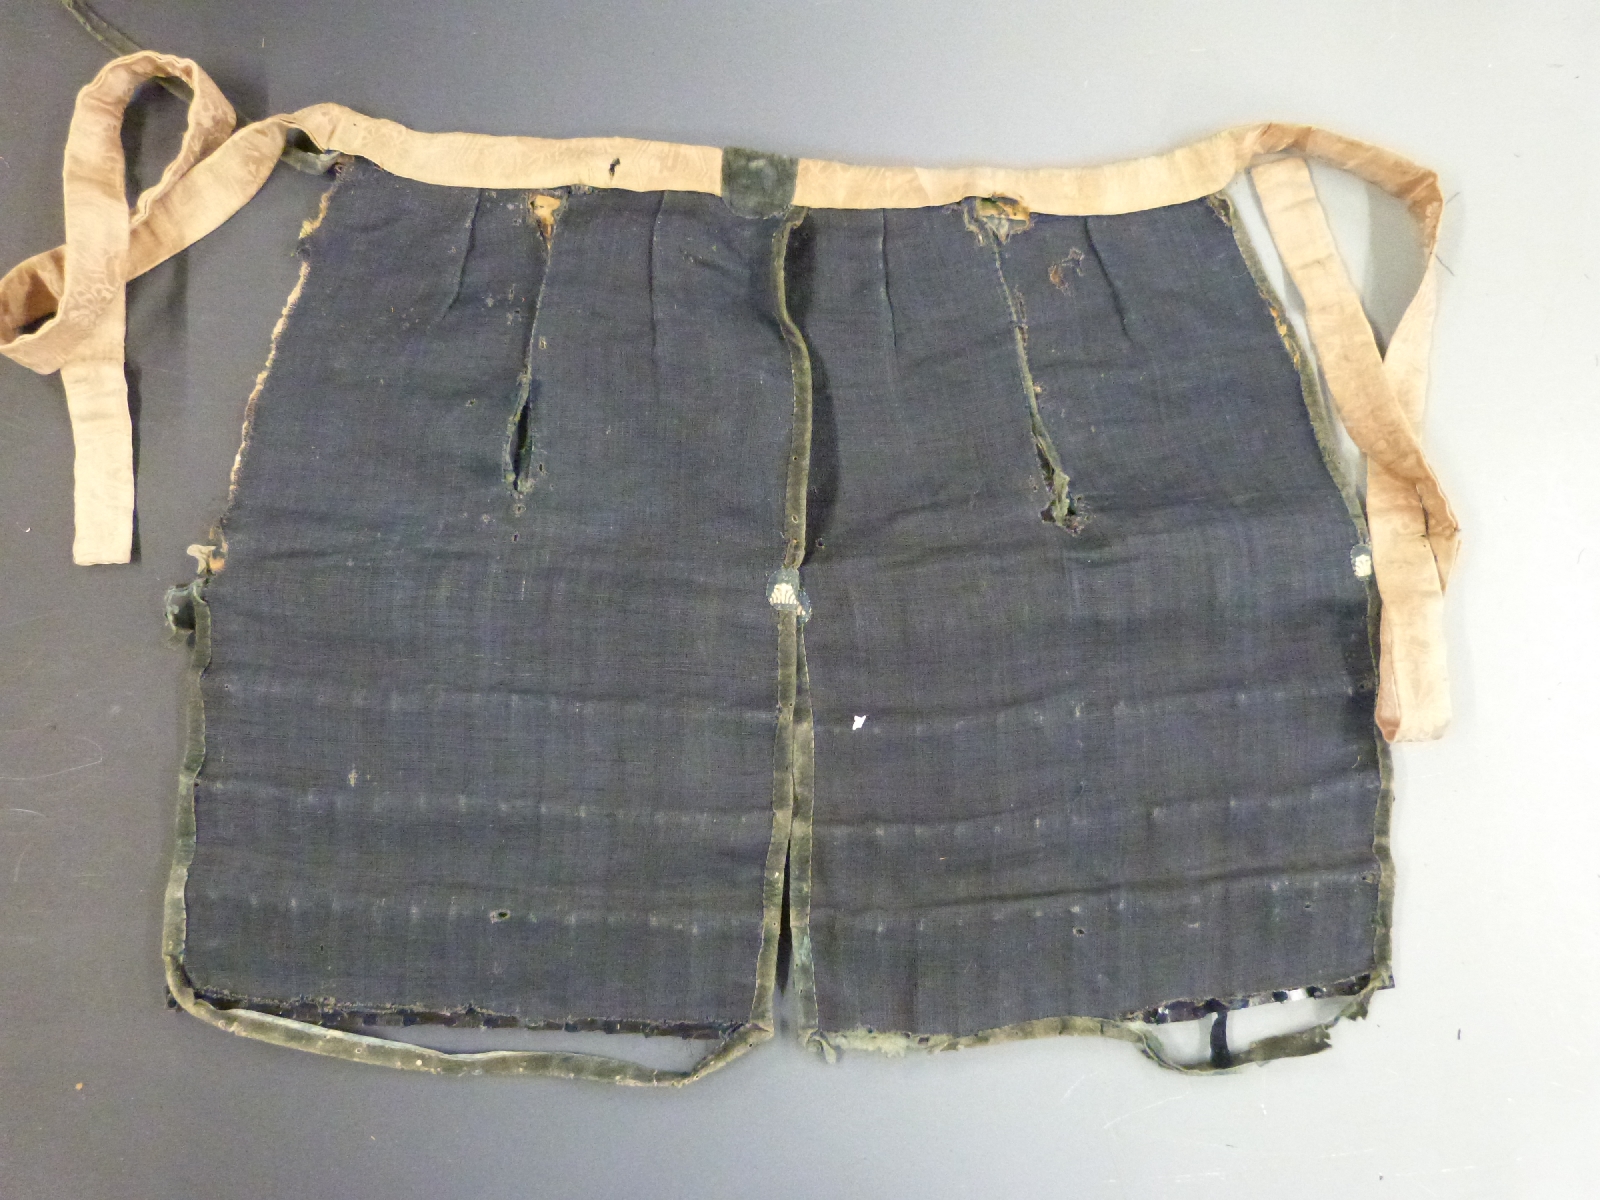 Japanese Edo period haidate yoroi (thigh armour) of lacquered leather construction with silk lining, - Image 3 of 3